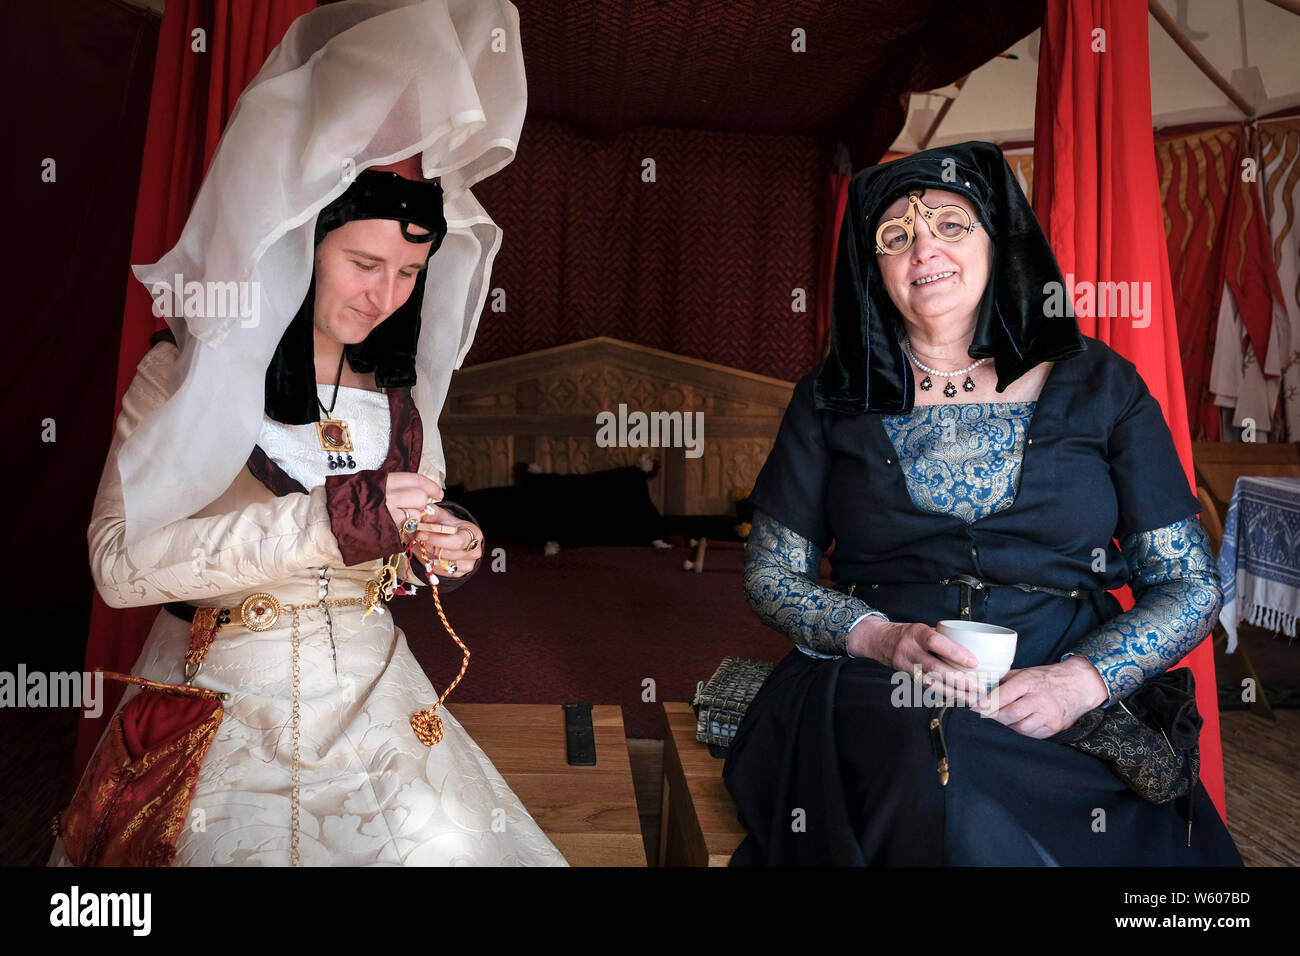 Actors participating in the historical event, recreate the atmosphere of the time inside one of the tents. Stock Photo